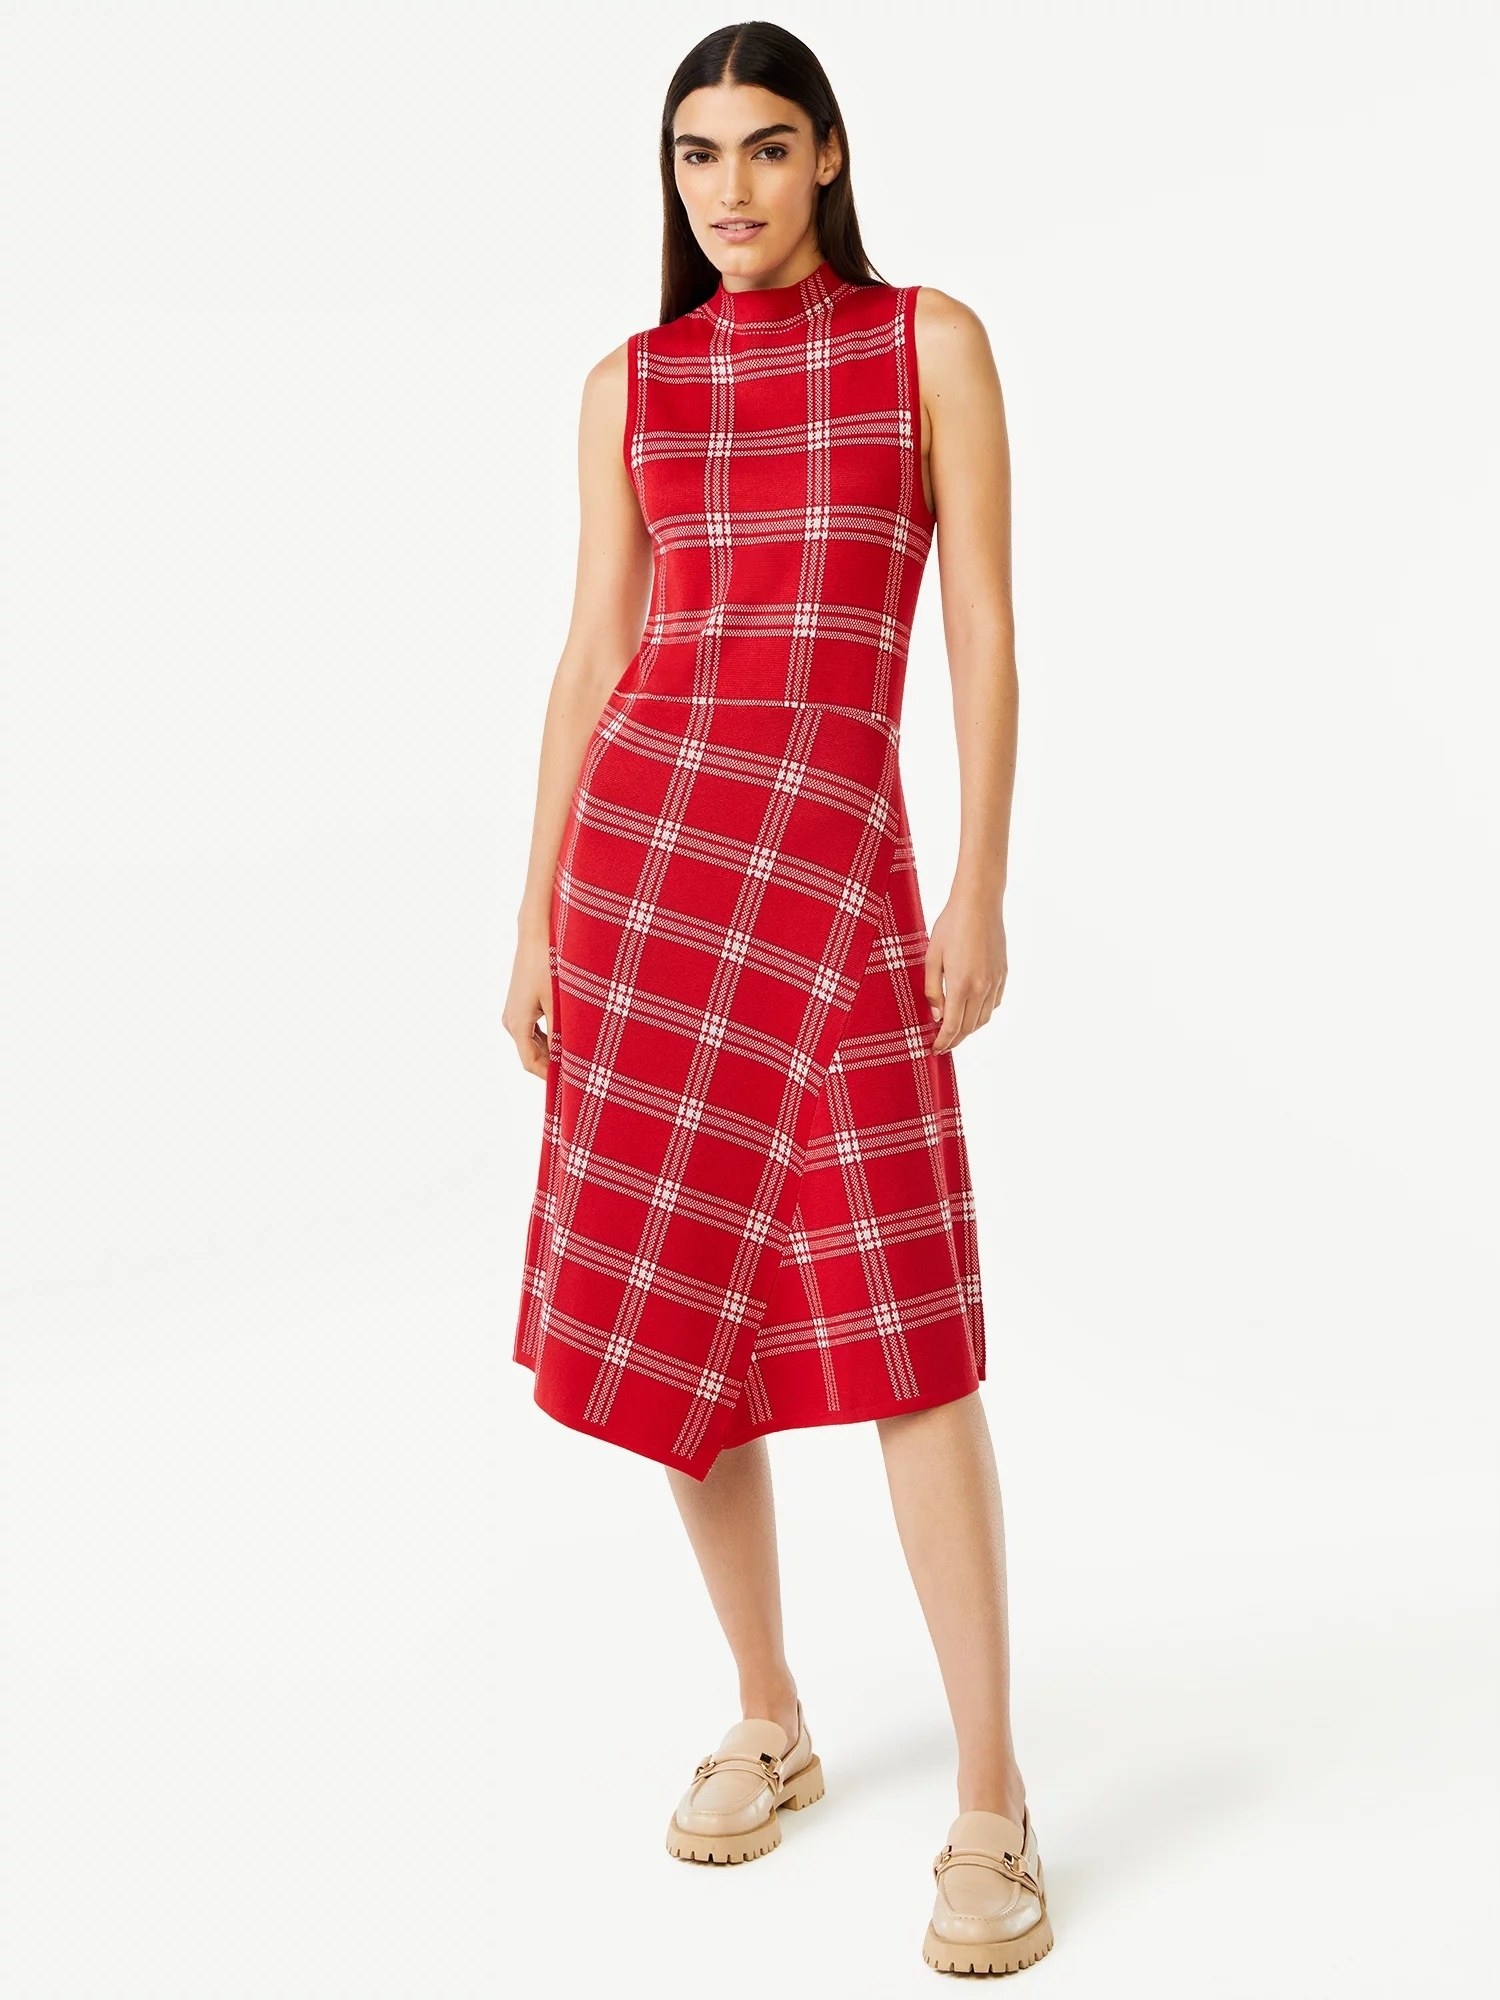 Model wearing red and white plaid dress